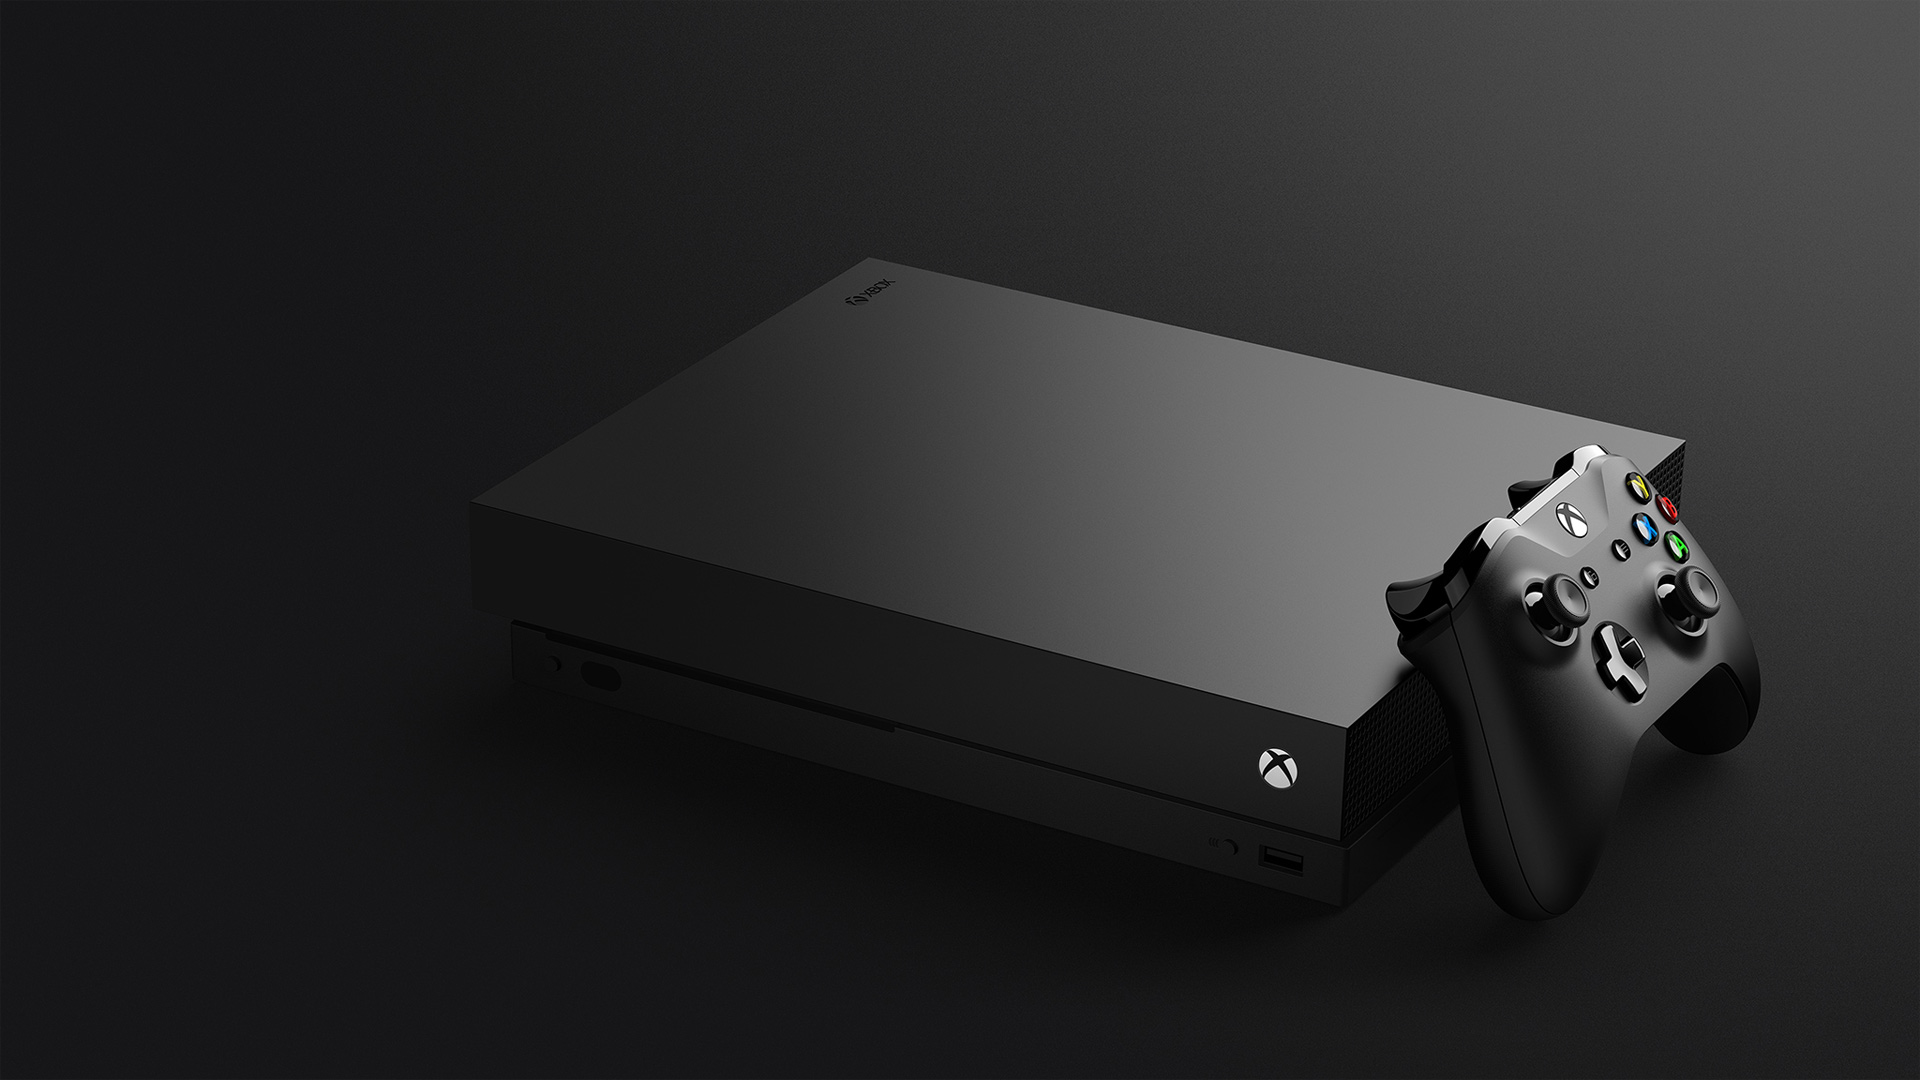 It's Important that Xbox One X is Such an Advancement